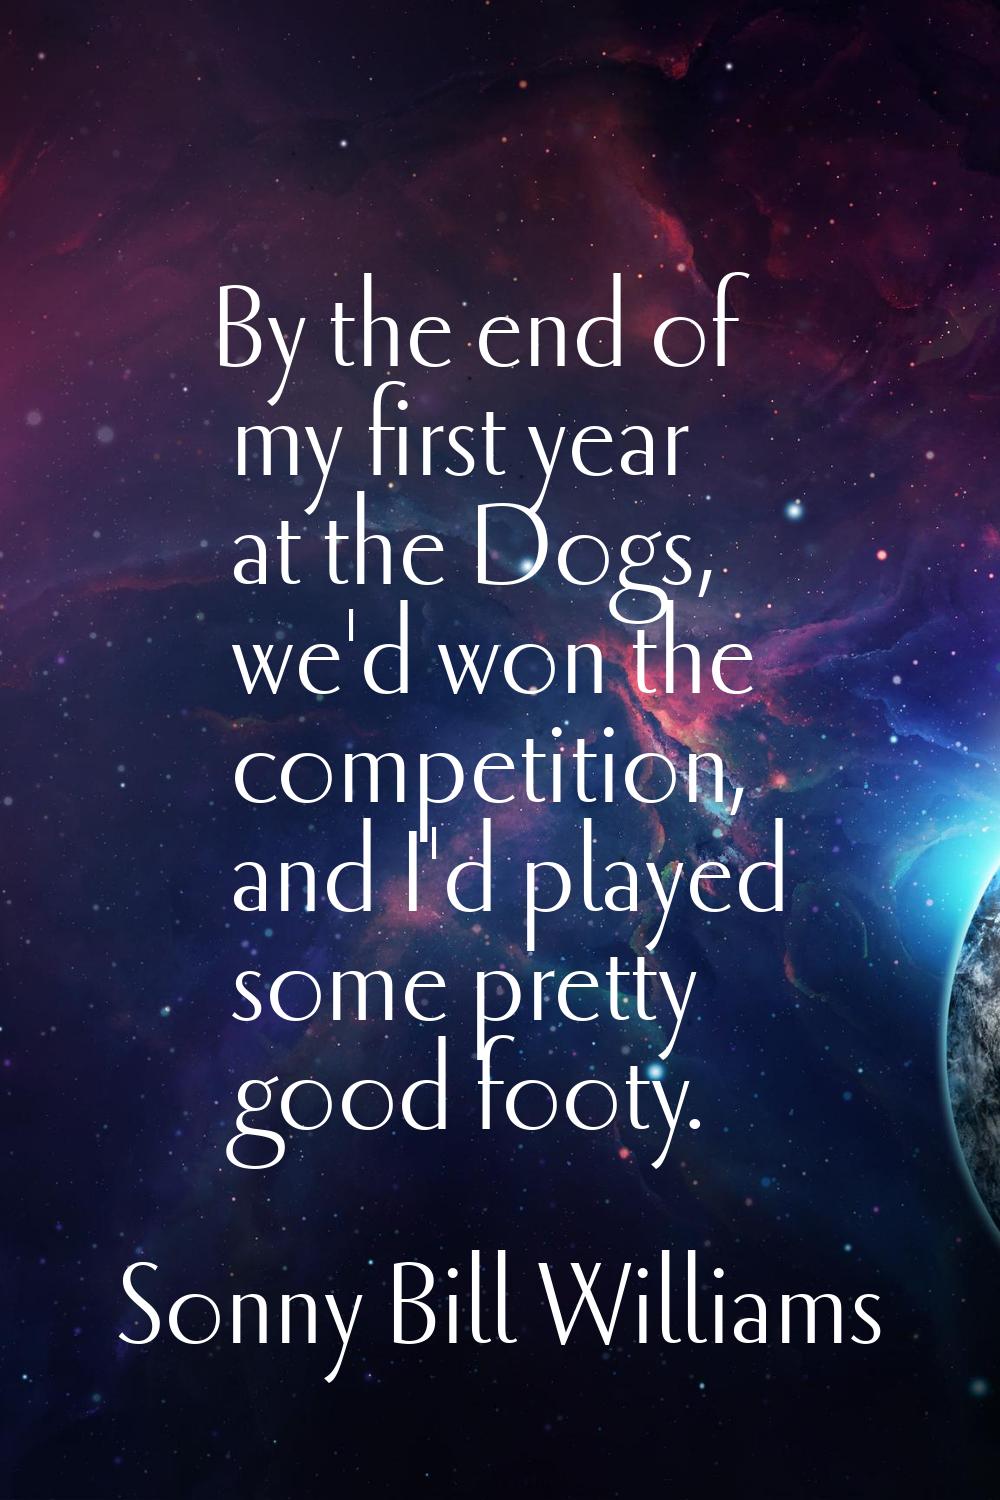 By the end of my first year at the Dogs, we'd won the competition, and I'd played some pretty good 